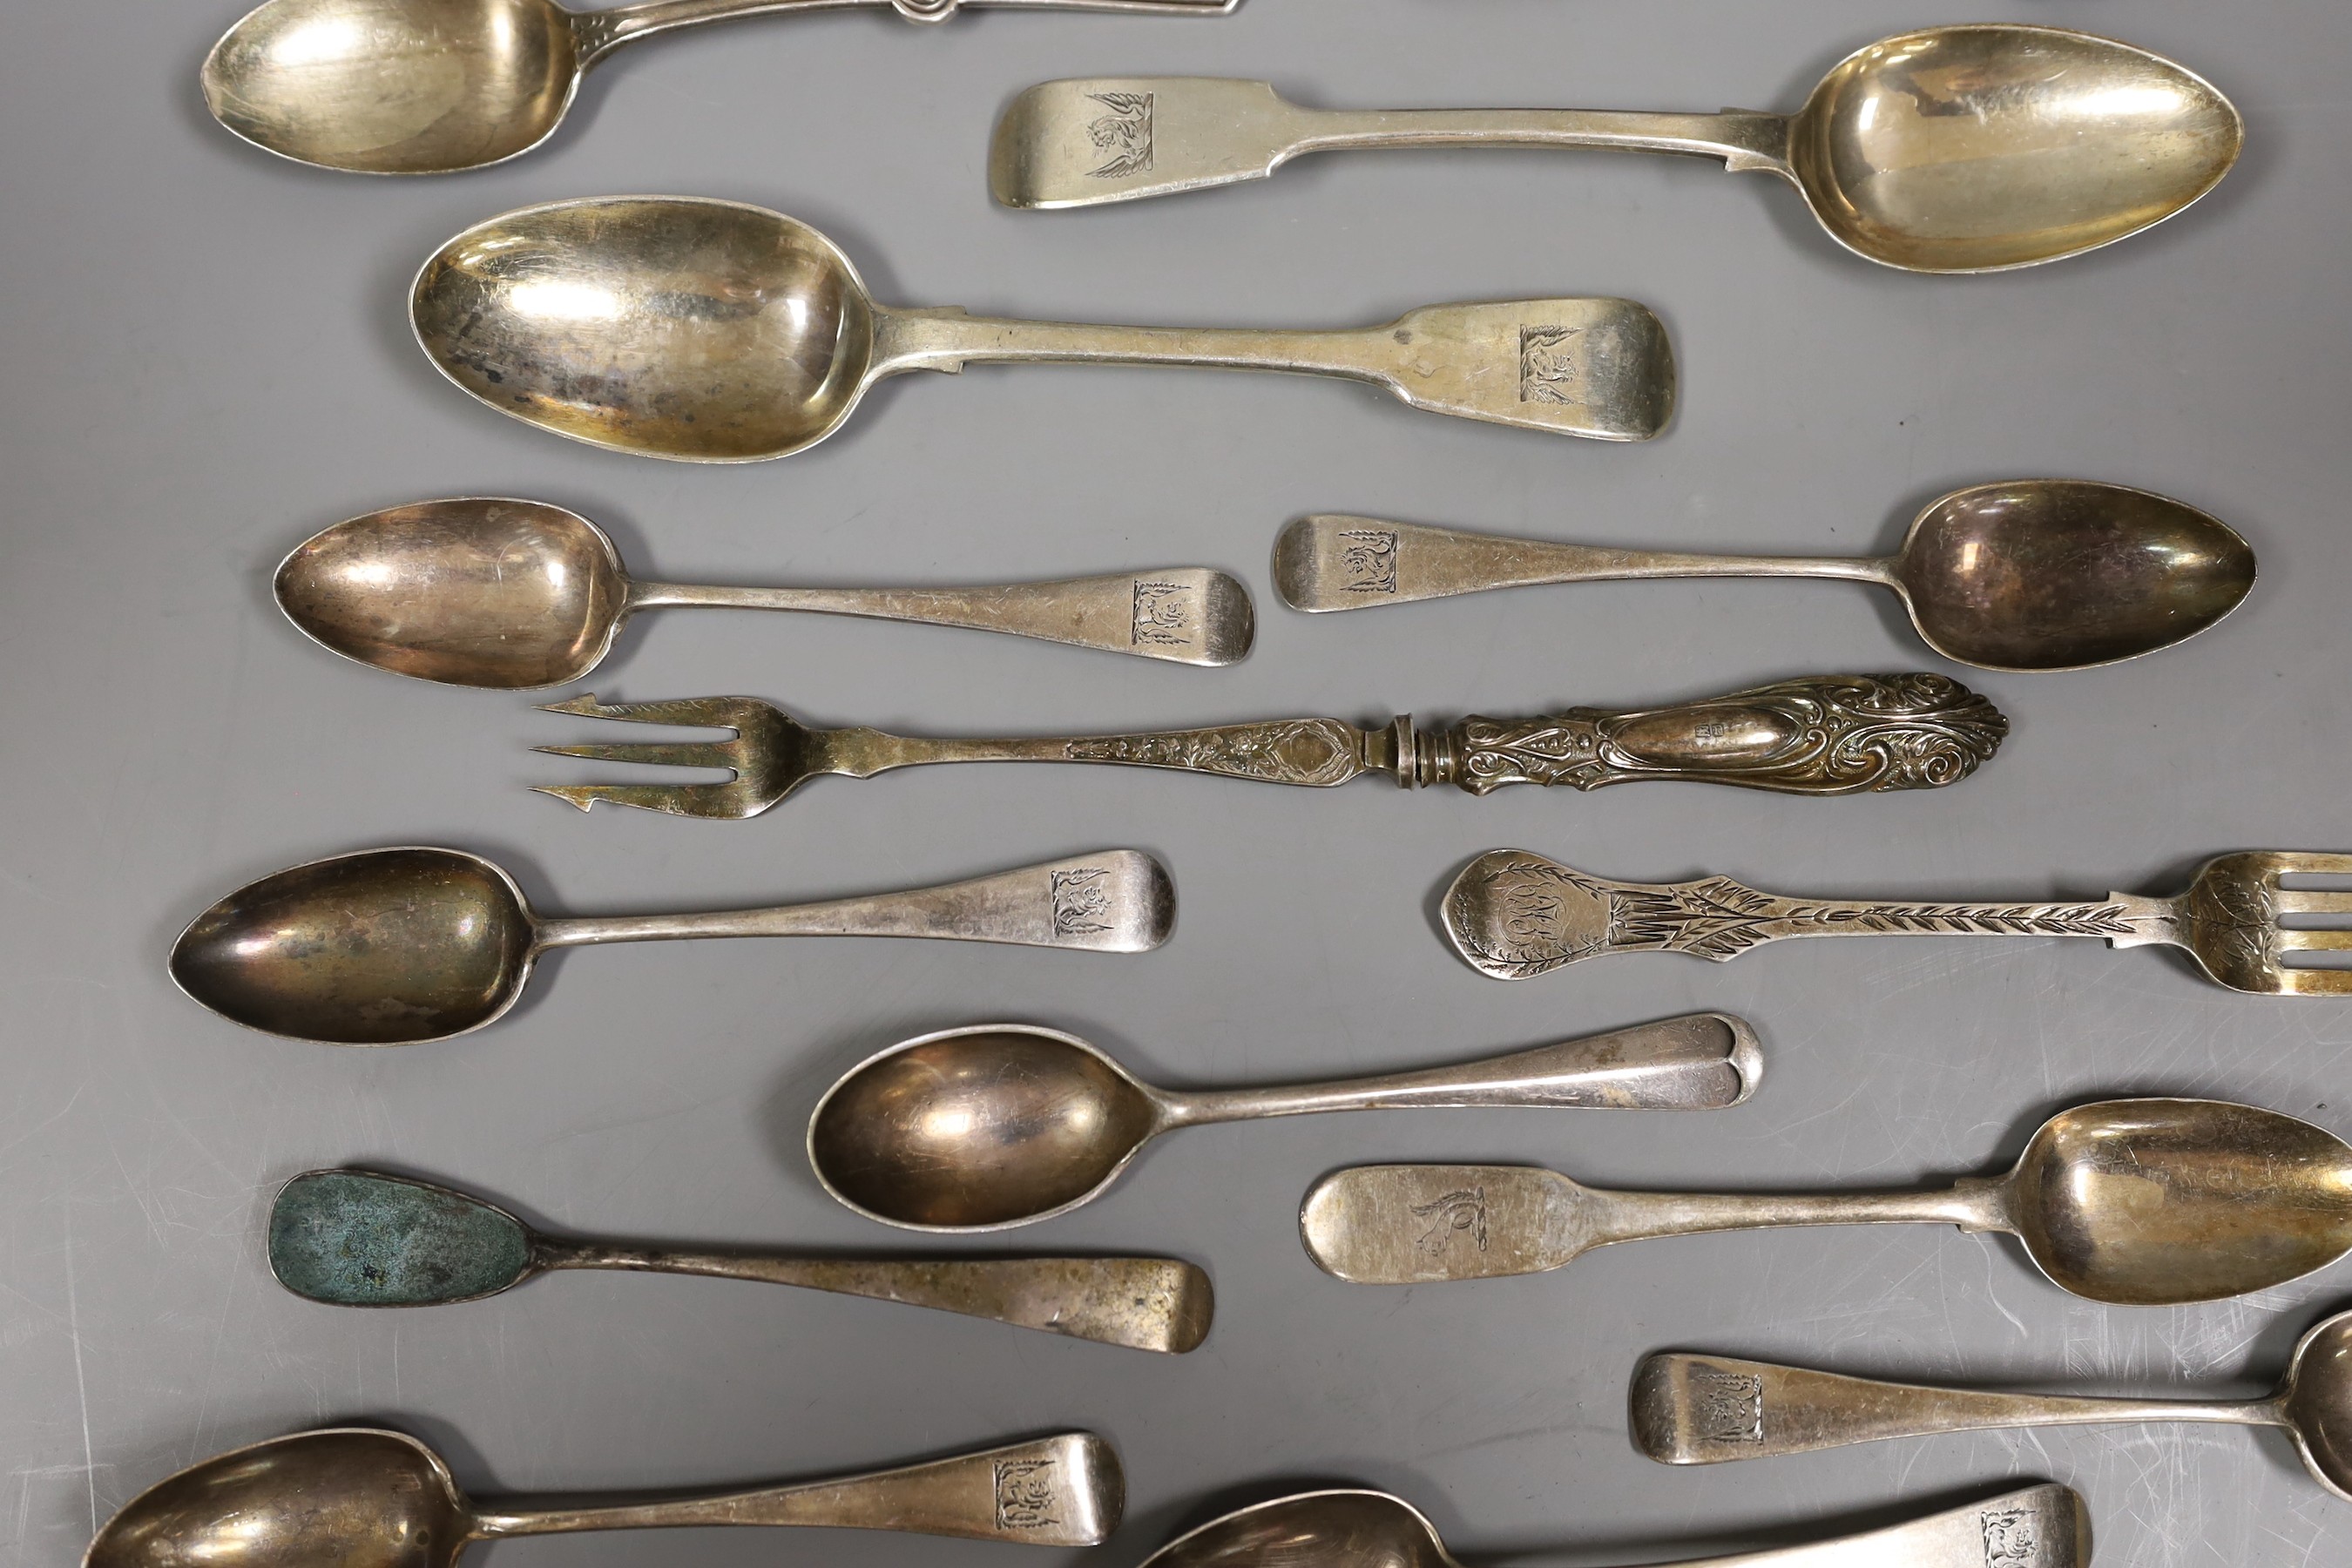 A set of six Victorian provincial silver Old English pattern teaspoons by Josiah Williams & Co, Exeter, 1877 and a small quantity of mainly 19th century silver flatware and a plated teaspoon and pickle fork, weighable si